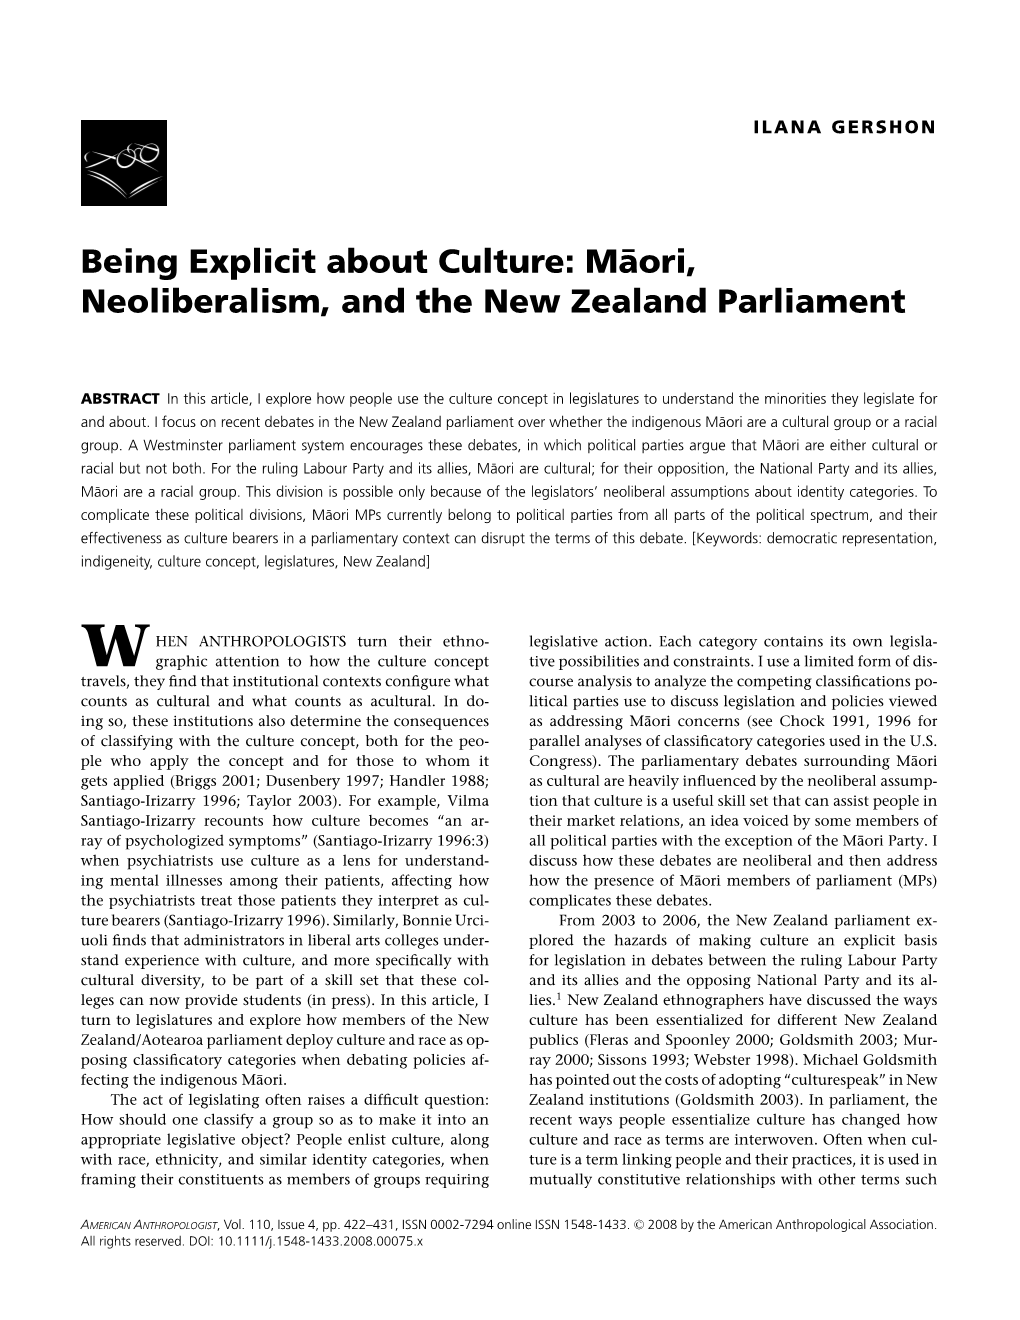 Being Explicit About Culture: Māori, Neoliberalism, and the New